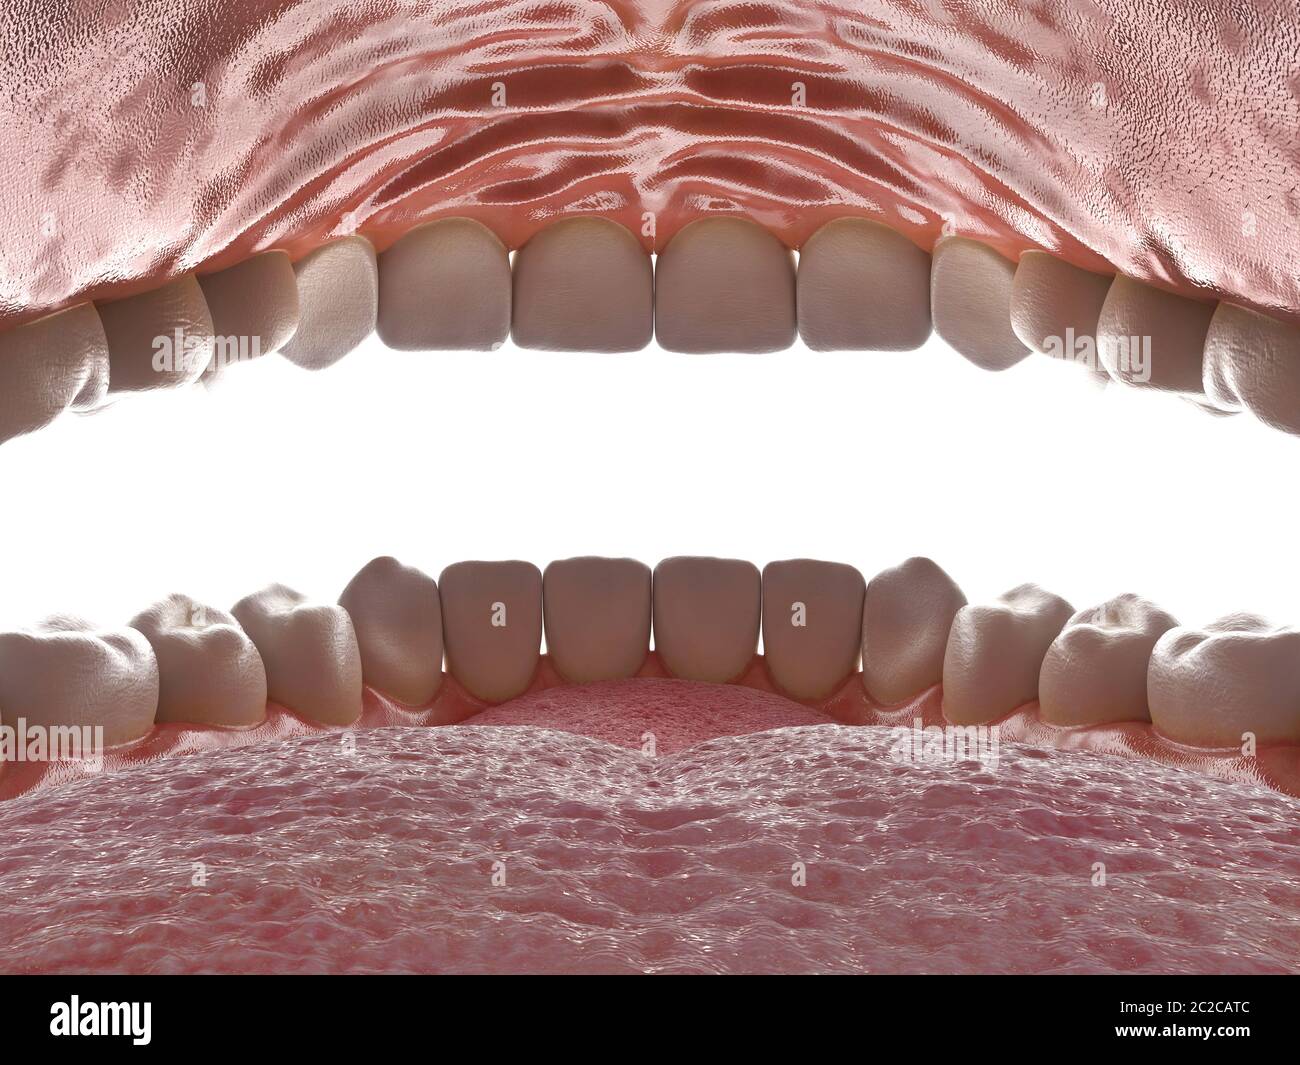 Human oral cavity. Inside an open mouth. Jaw with teeth inside view. Healthy teeth. Dental care and orthodontic concept. 3D rendering Stock Photo